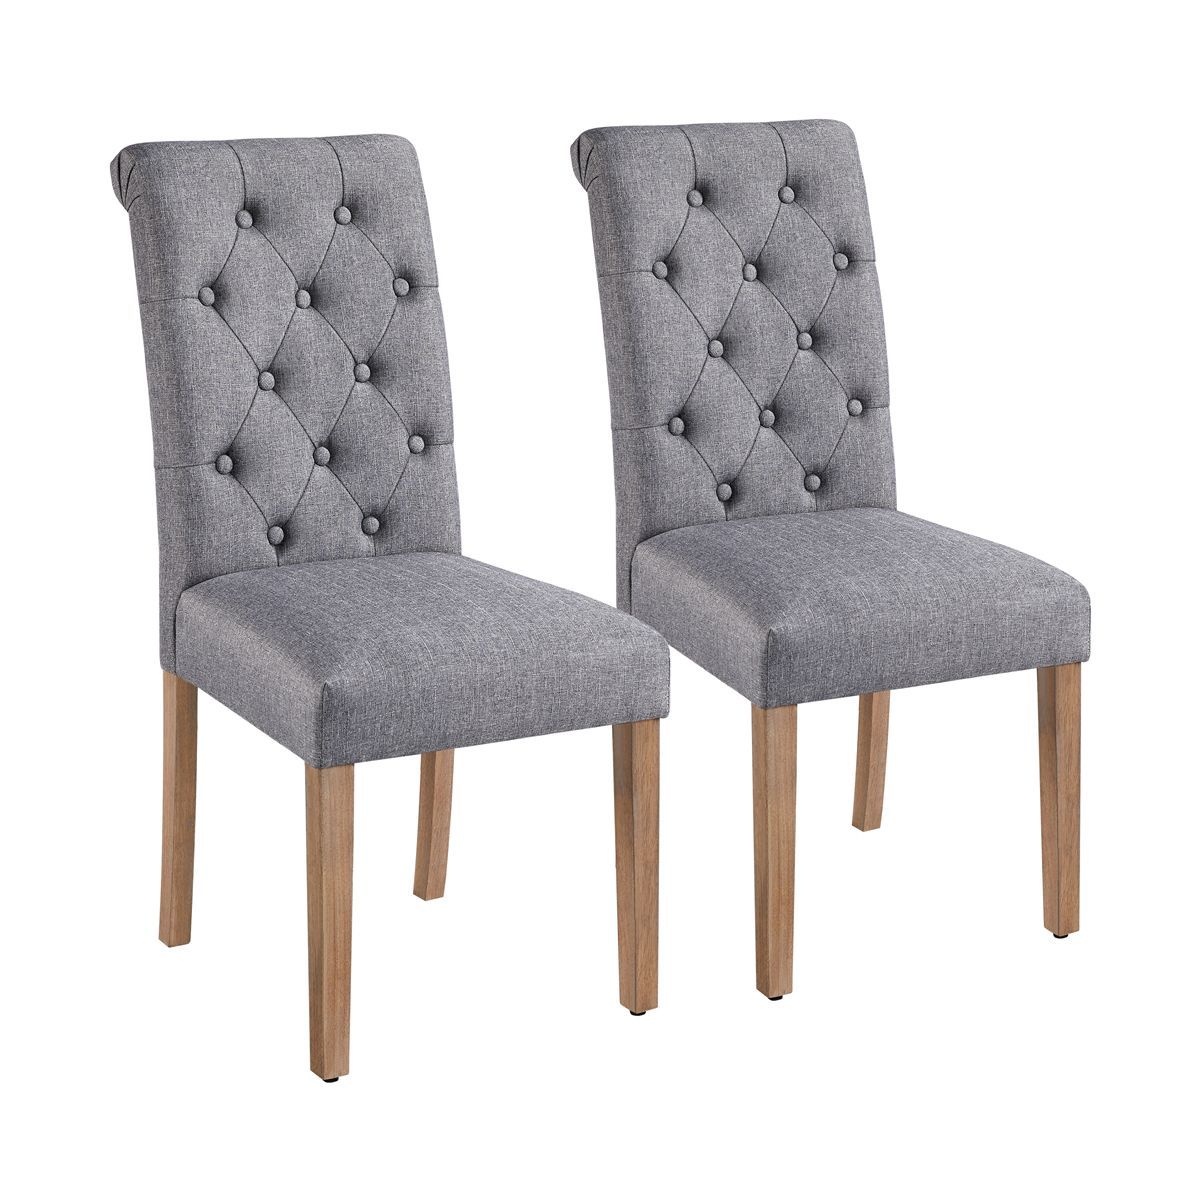 Yaheetech 2pcs Classic Fabric Upholstered Dining Chair Kitchen Chair | Target